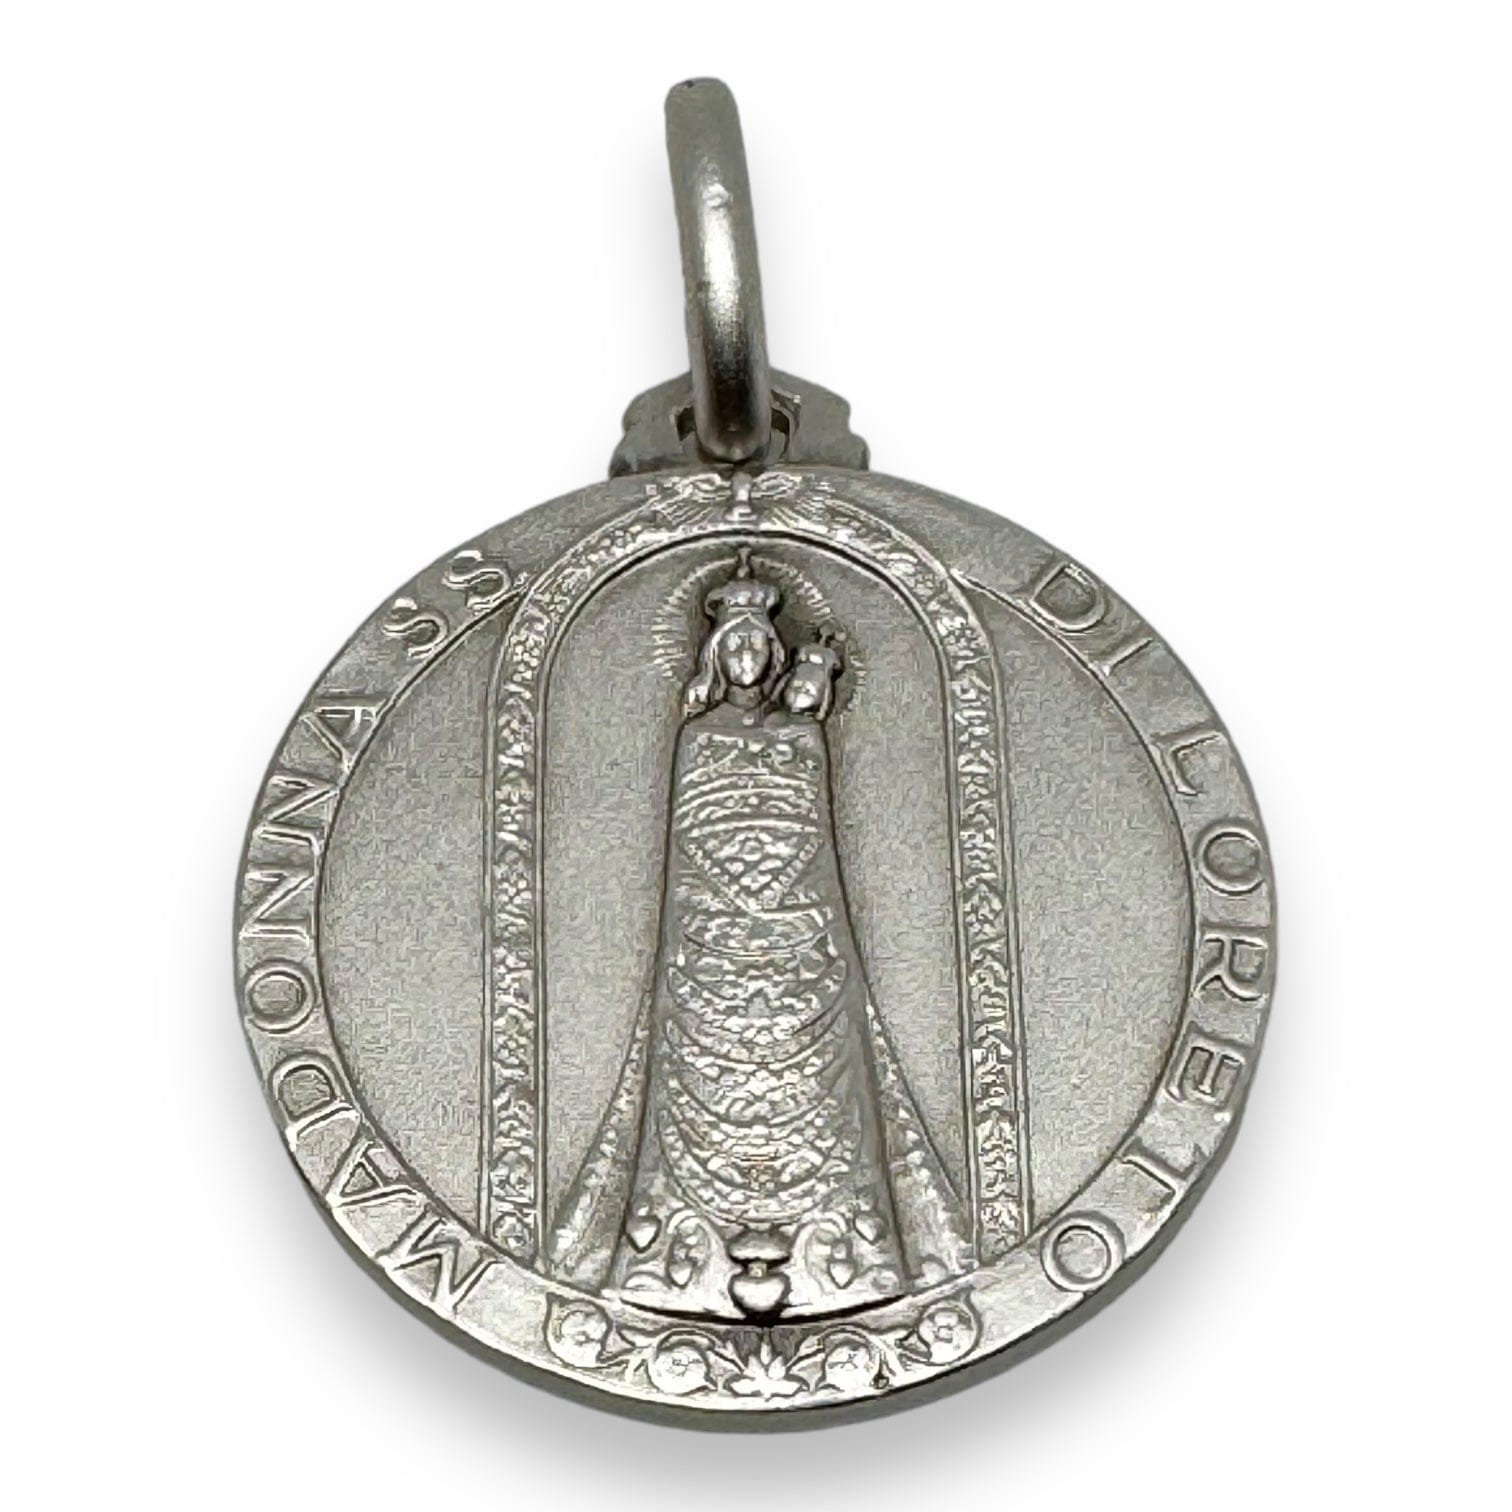 Catholically Blessed Silver 925 Madonna of Loreto Medal with Airplane Motif - Made in Italy